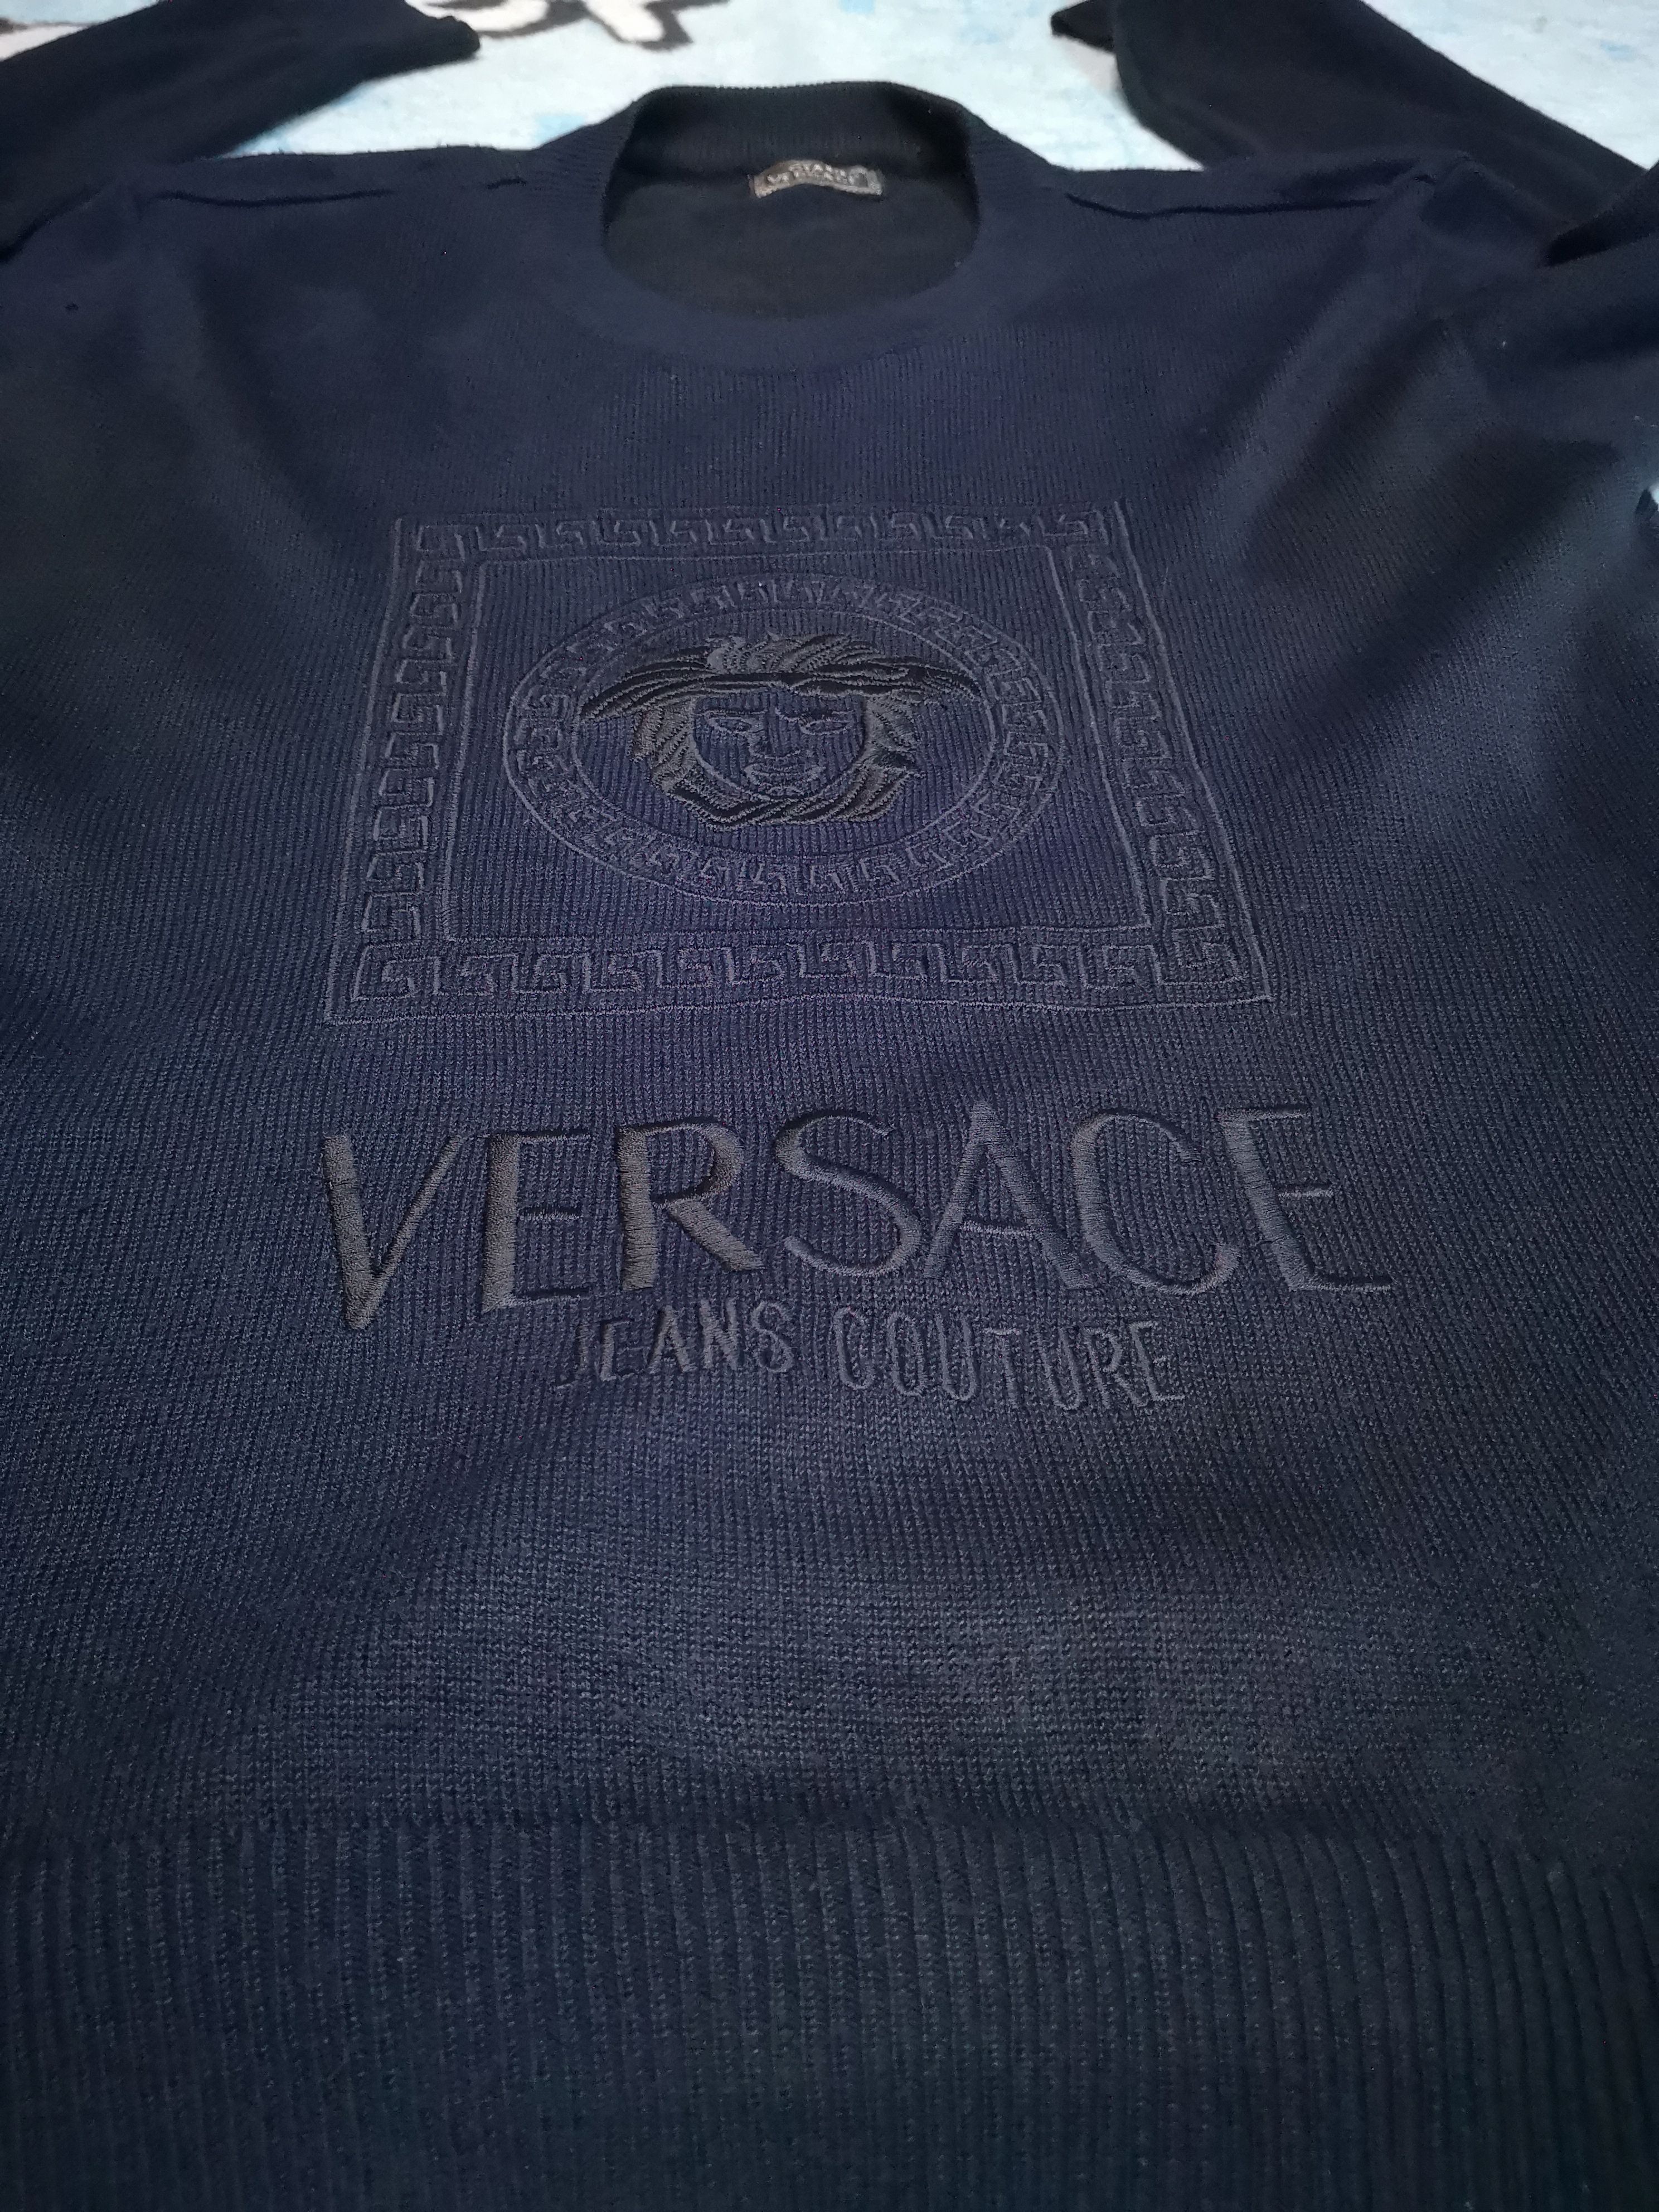 Versace Jeans Couture Spring Knitewear Big Logo by Gianni Versace Size US M / EU 48-50 / 2 - 1 Preview